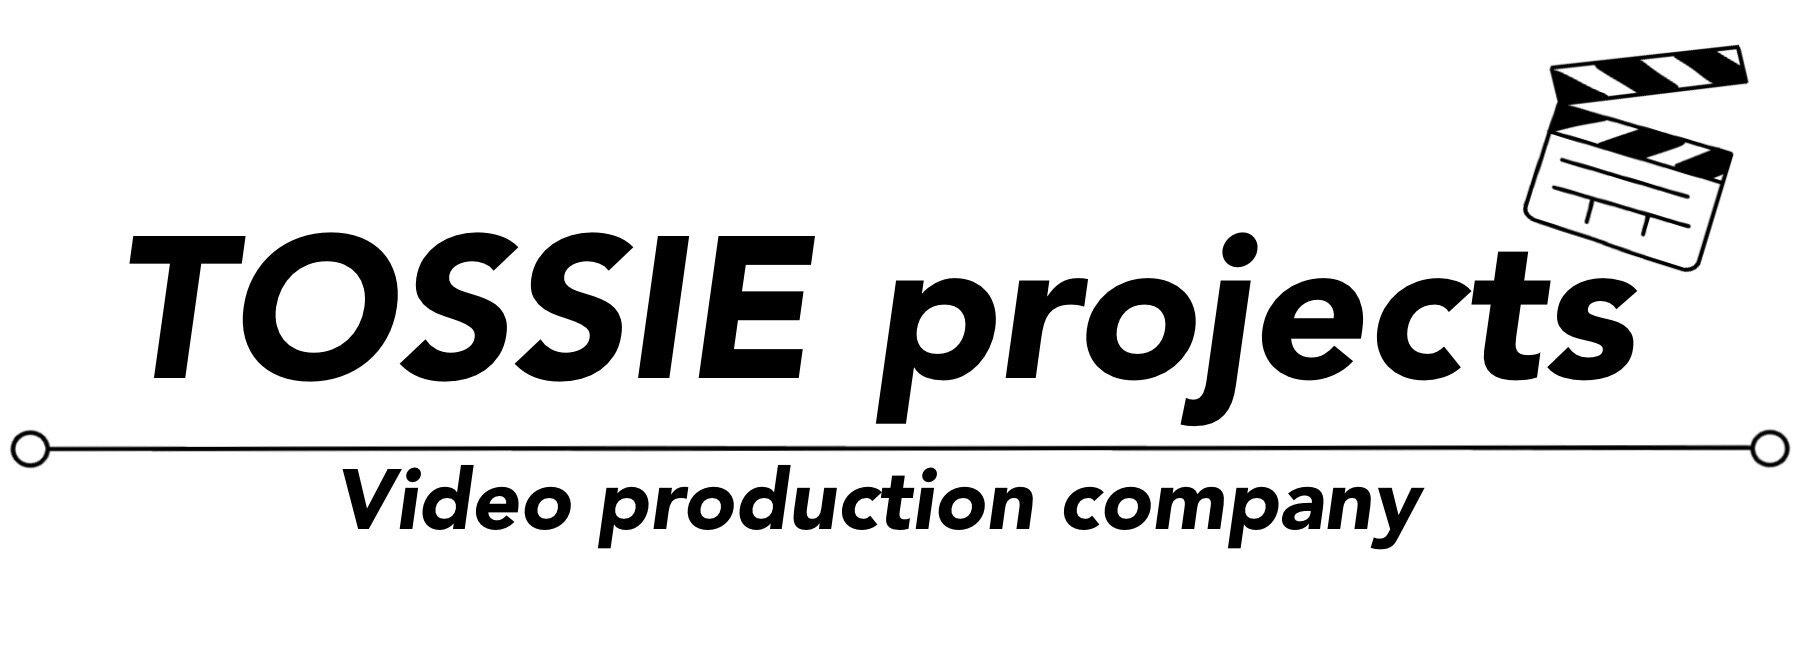 TOSSIE projects